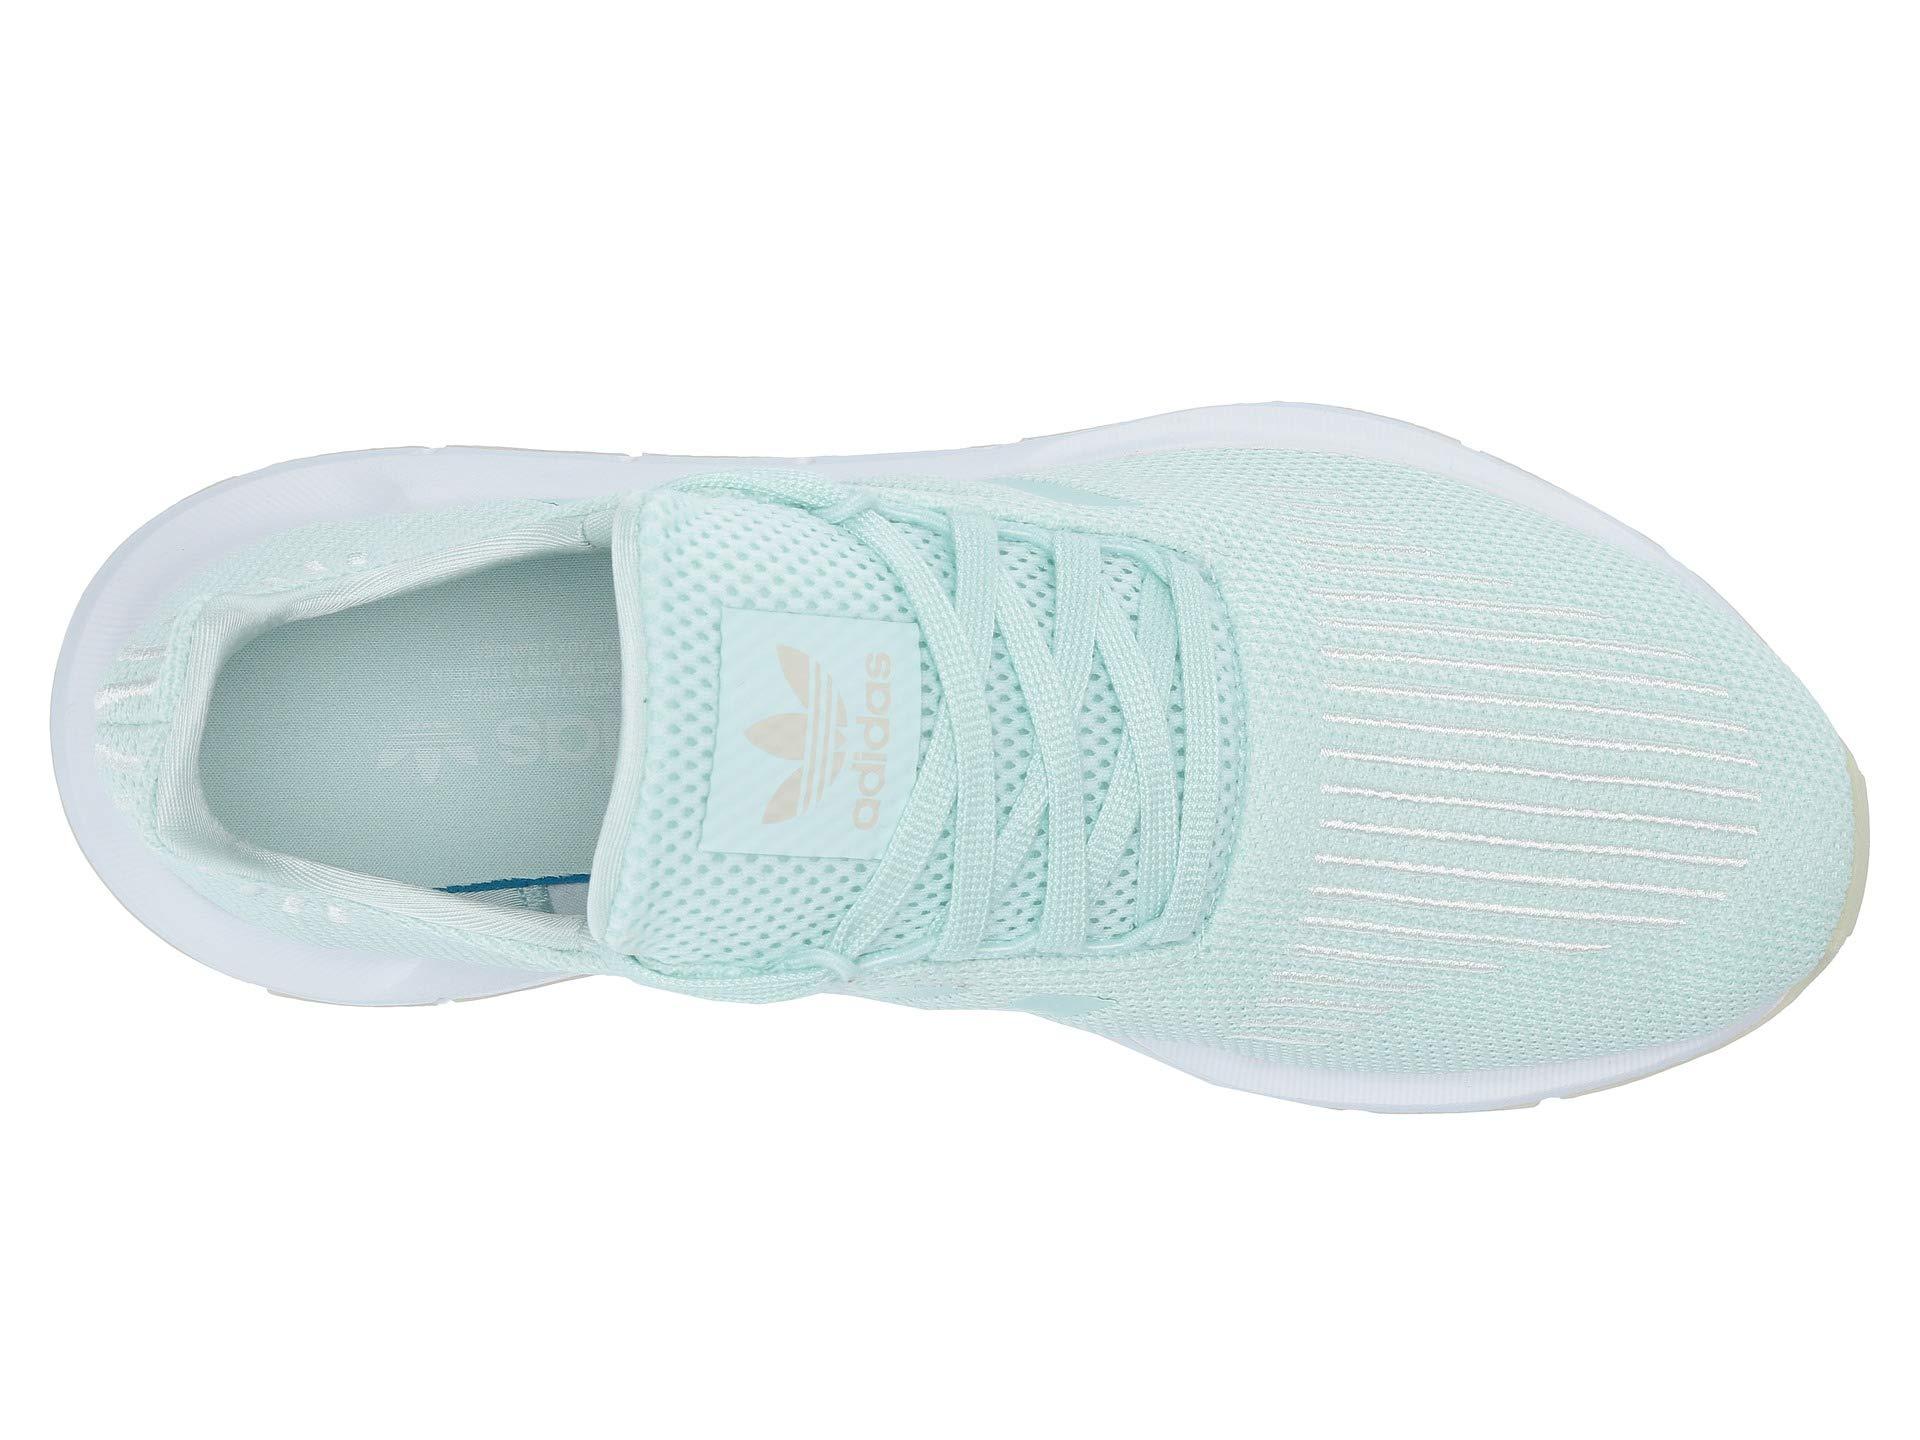 adidas Originals Lace Swift Run Ice Mint & Off White Womens Shoes | Lyst